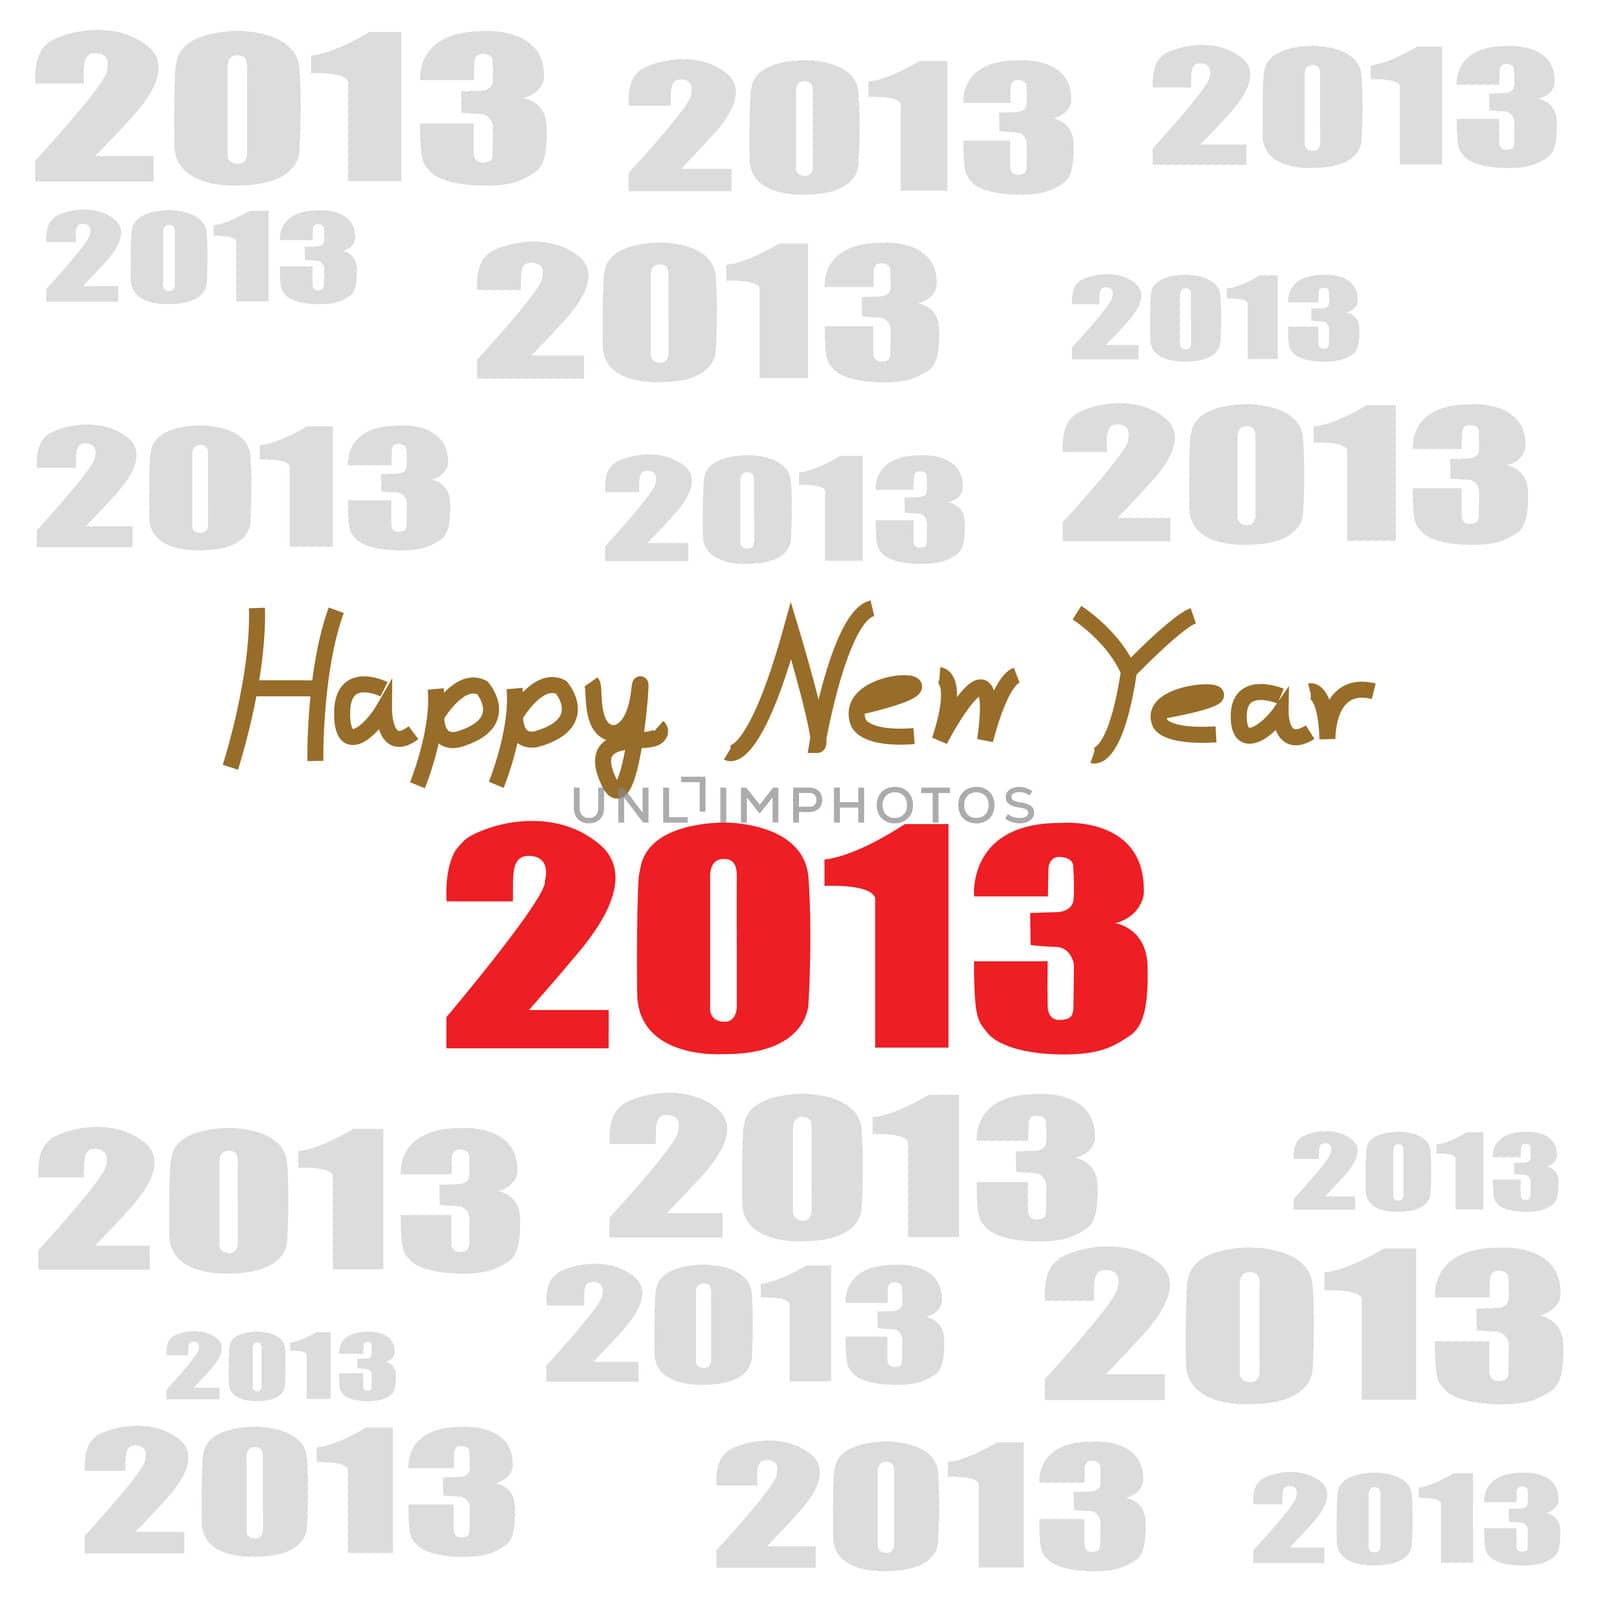 Happy new year in 2013.